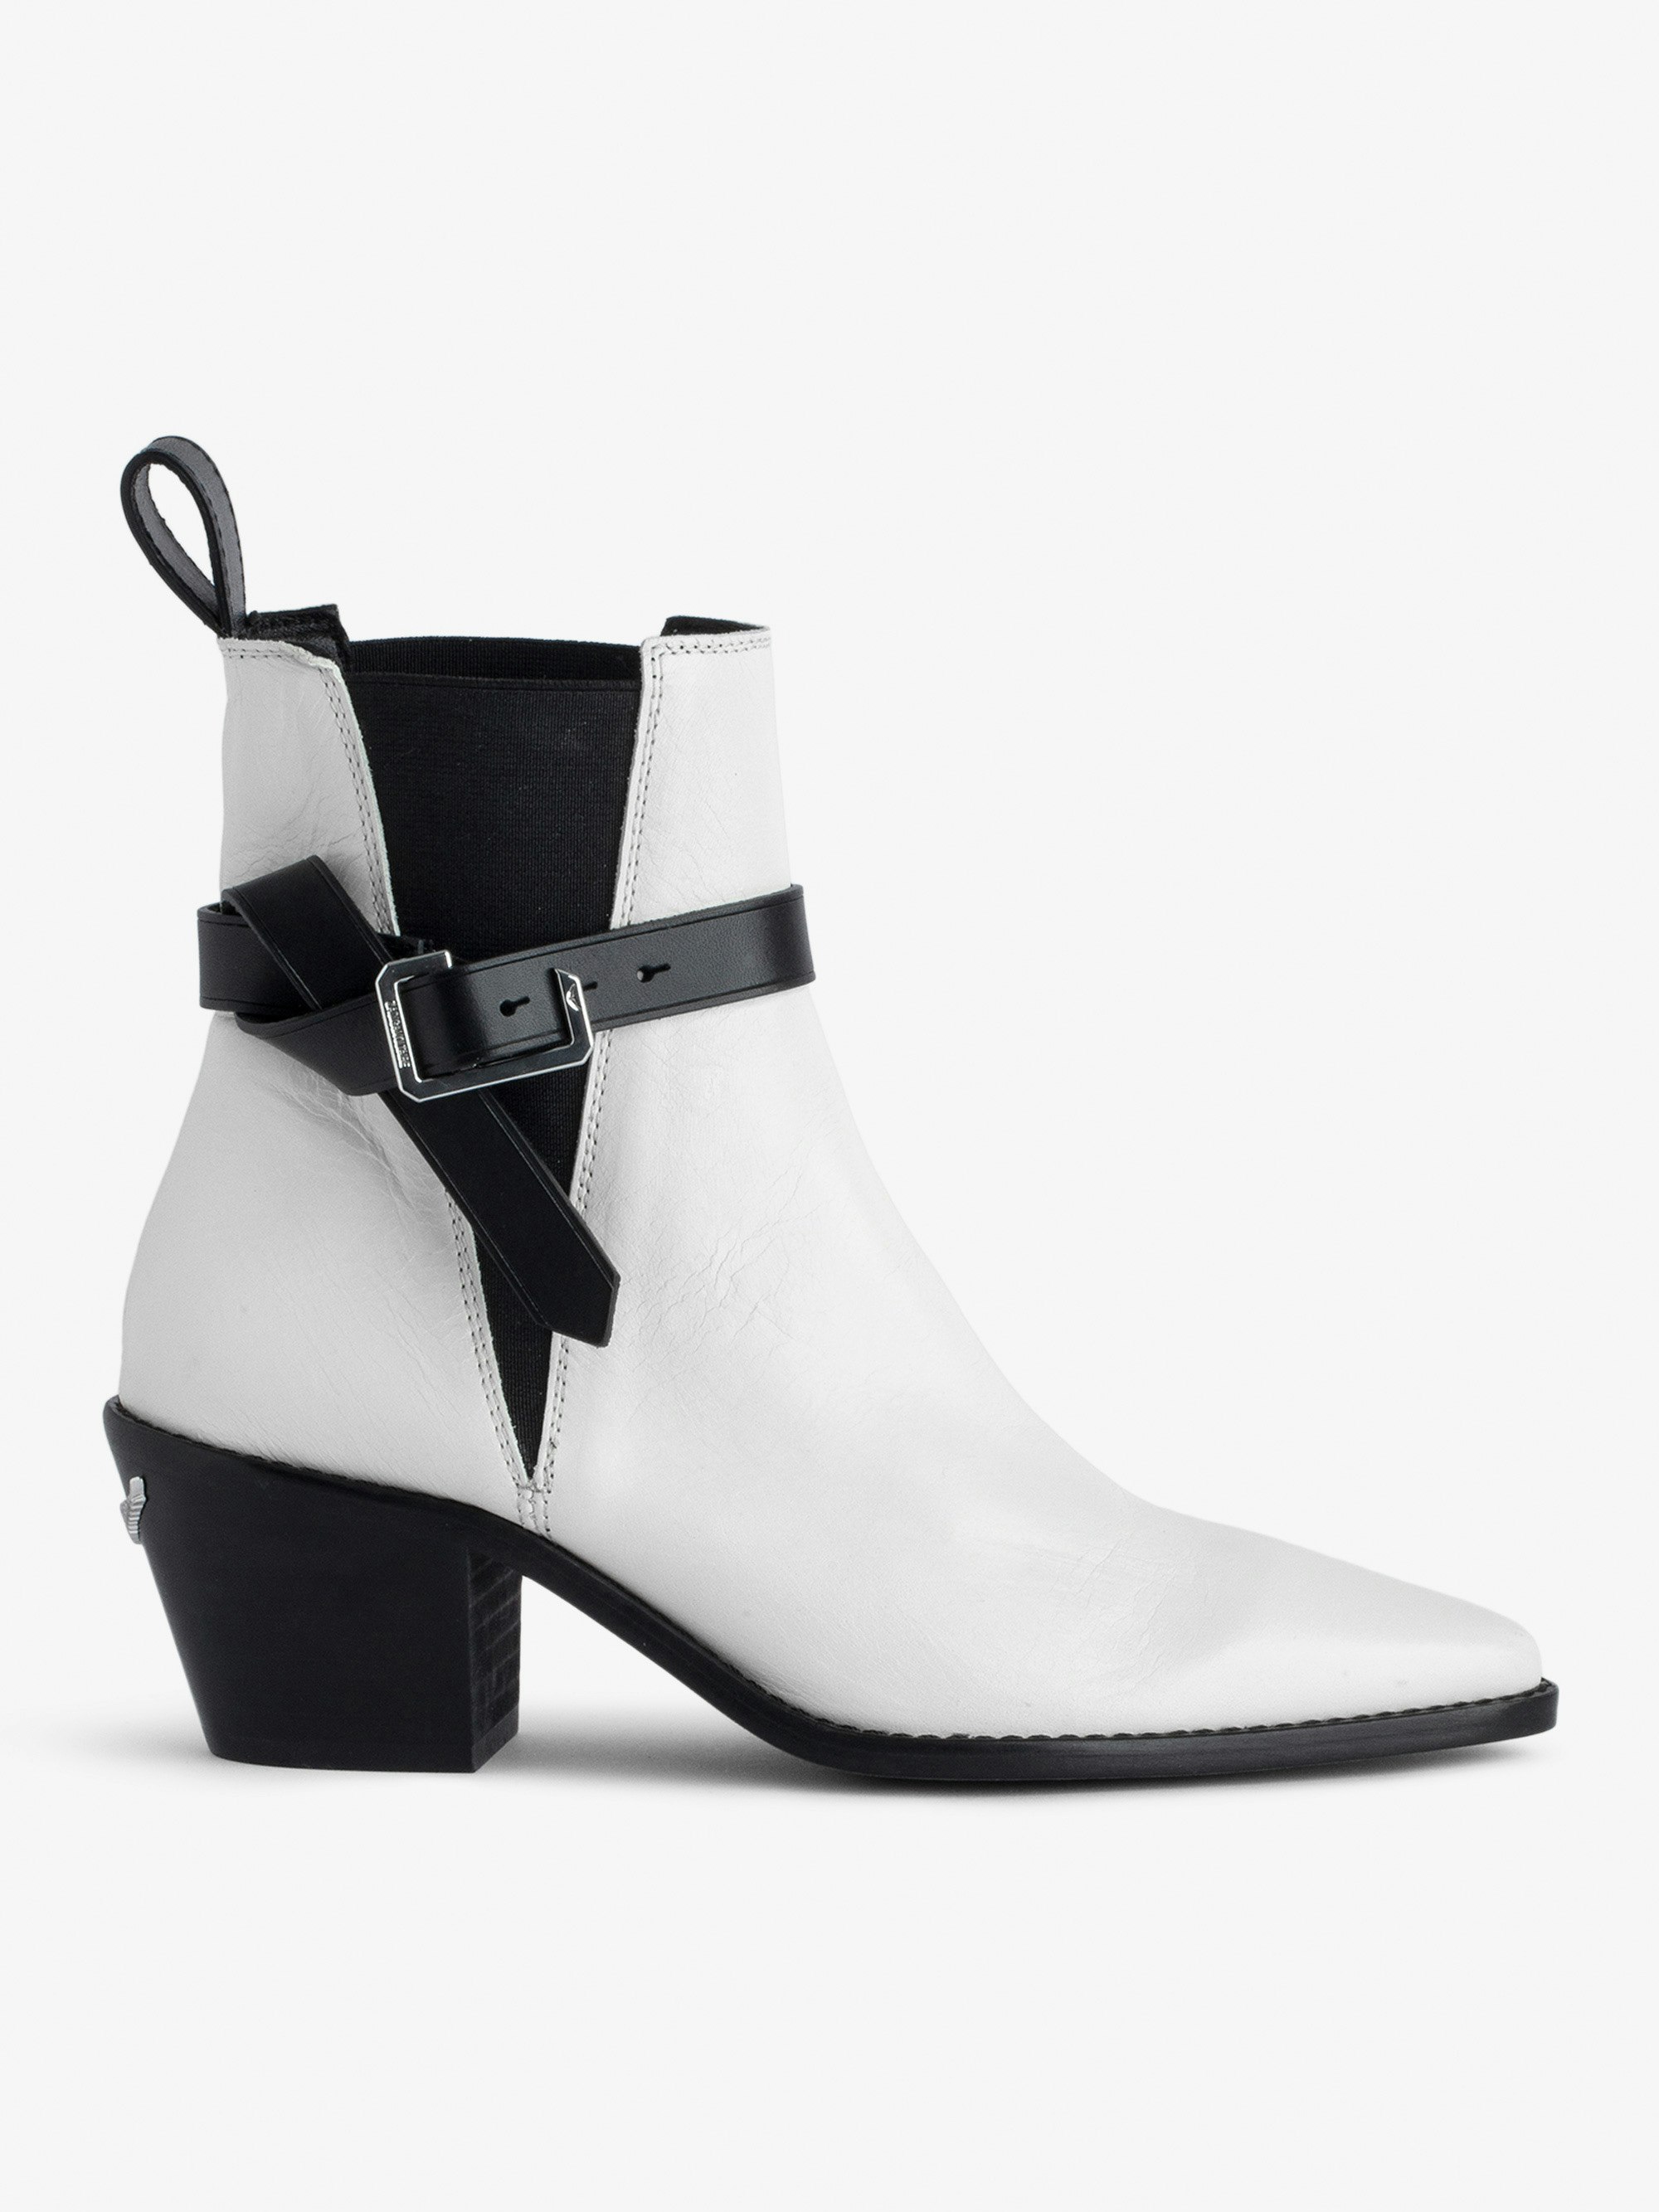 Tyler Ankle Boots - Women’s white vintage-style leather ankle boots with C buckle.